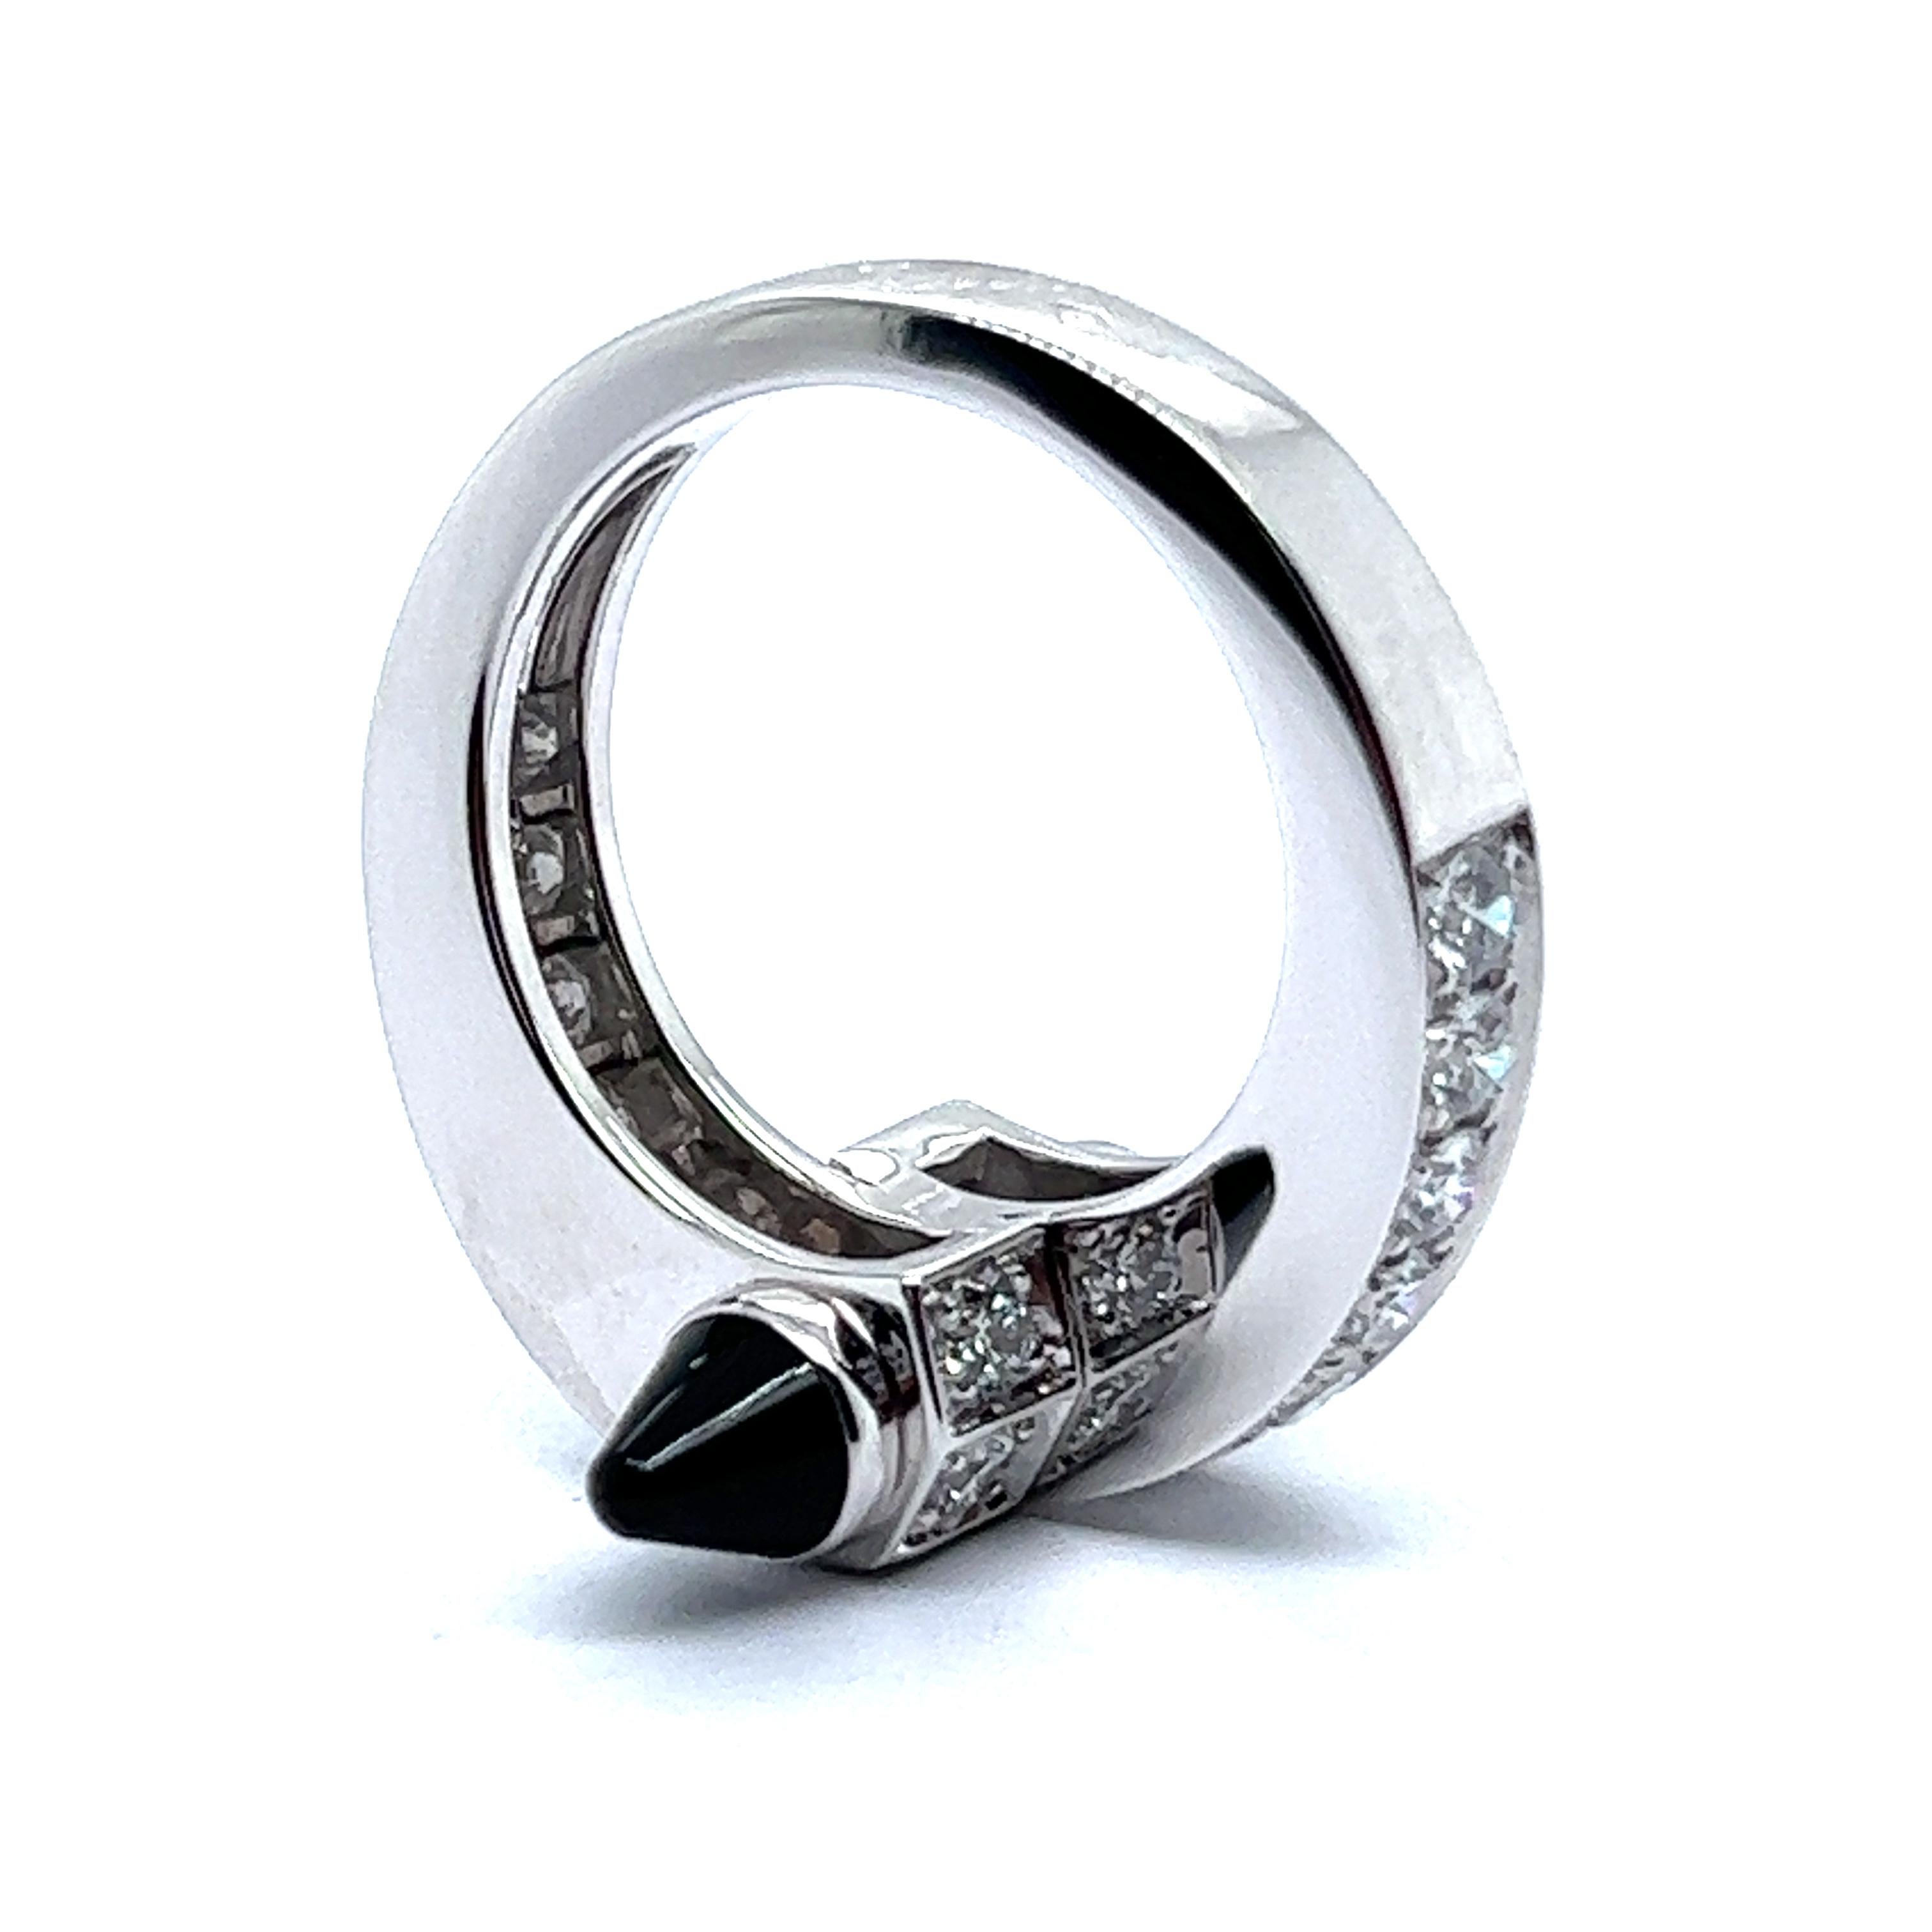 Modern Cartier Menotte Ring with Diamonds and Onyx in 18 Karat White Gold 